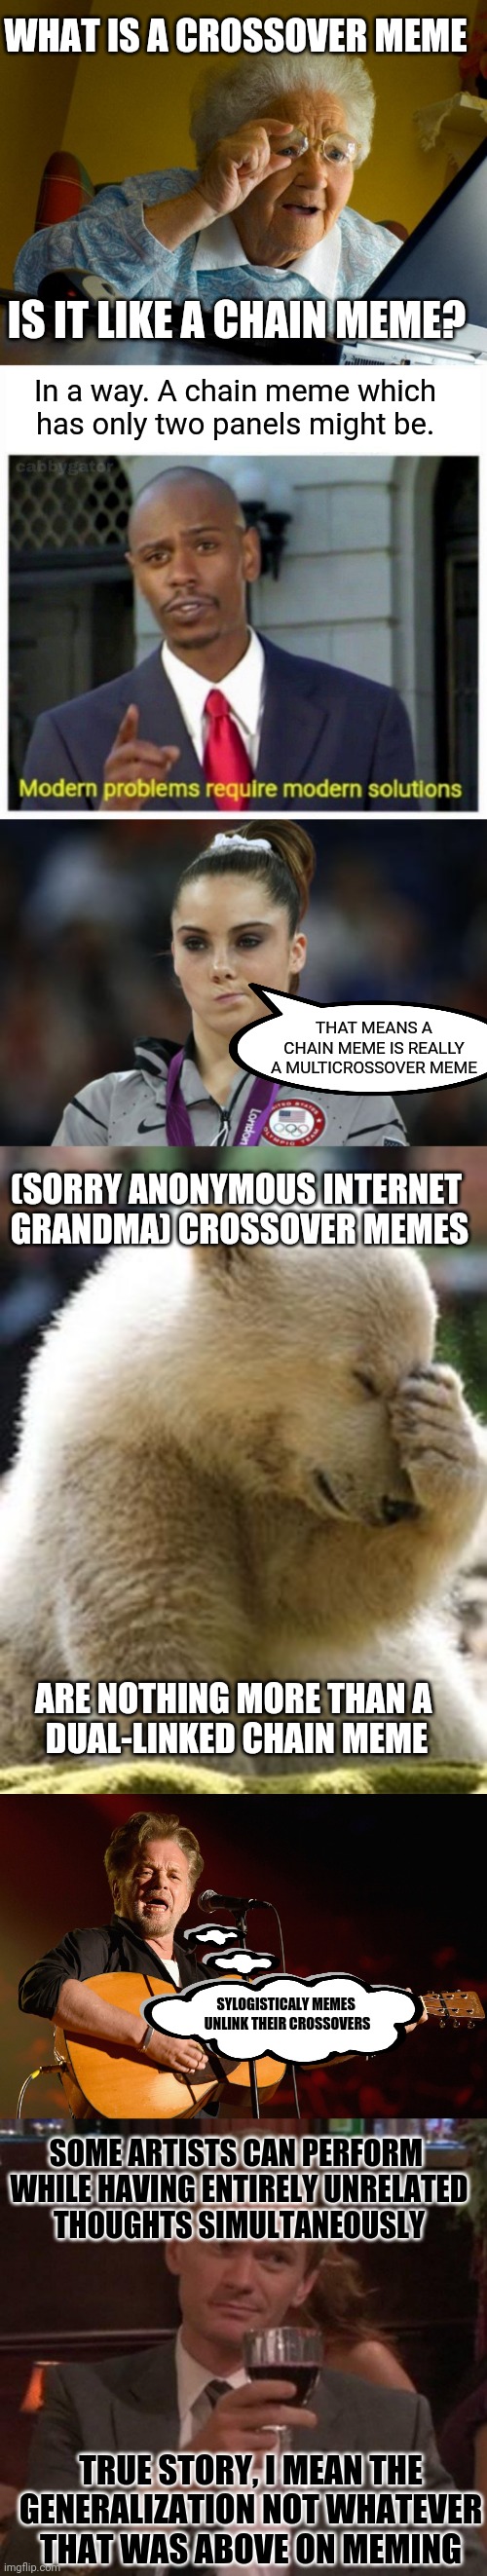 Quantity Over Quality | WHAT IS A CROSSOVER MEME; IS IT LIKE A CHAIN MEME? In a way. A chain meme which has only two panels might be. THAT MEANS A CHAIN MEME IS REALLY A MULTICROSSOVER MEME; (SORRY ANONYMOUS INTERNET 
GRANDMA) CROSSOVER MEMES; ARE NOTHING MORE THAN A 
DUAL-LINKED CHAIN MEME; SYLOGISTICALY MEMES 
UNLINK THEIR CROSSOVERS; SOME ARTISTS CAN PERFORM
 WHILE HAVING ENTIRELY UNRELATED
 THOUGHTS SIMULTANEOUSLY; TRUE STORY, I MEAN THE GENERALIZATION NOT WHATEVER THAT WAS ABOVE ON MEMING | image tagged in memes,grandma finds the internet,modern problems,mckayla maroney not impressed,hopeless,john cougar mellencamp | made w/ Imgflip meme maker